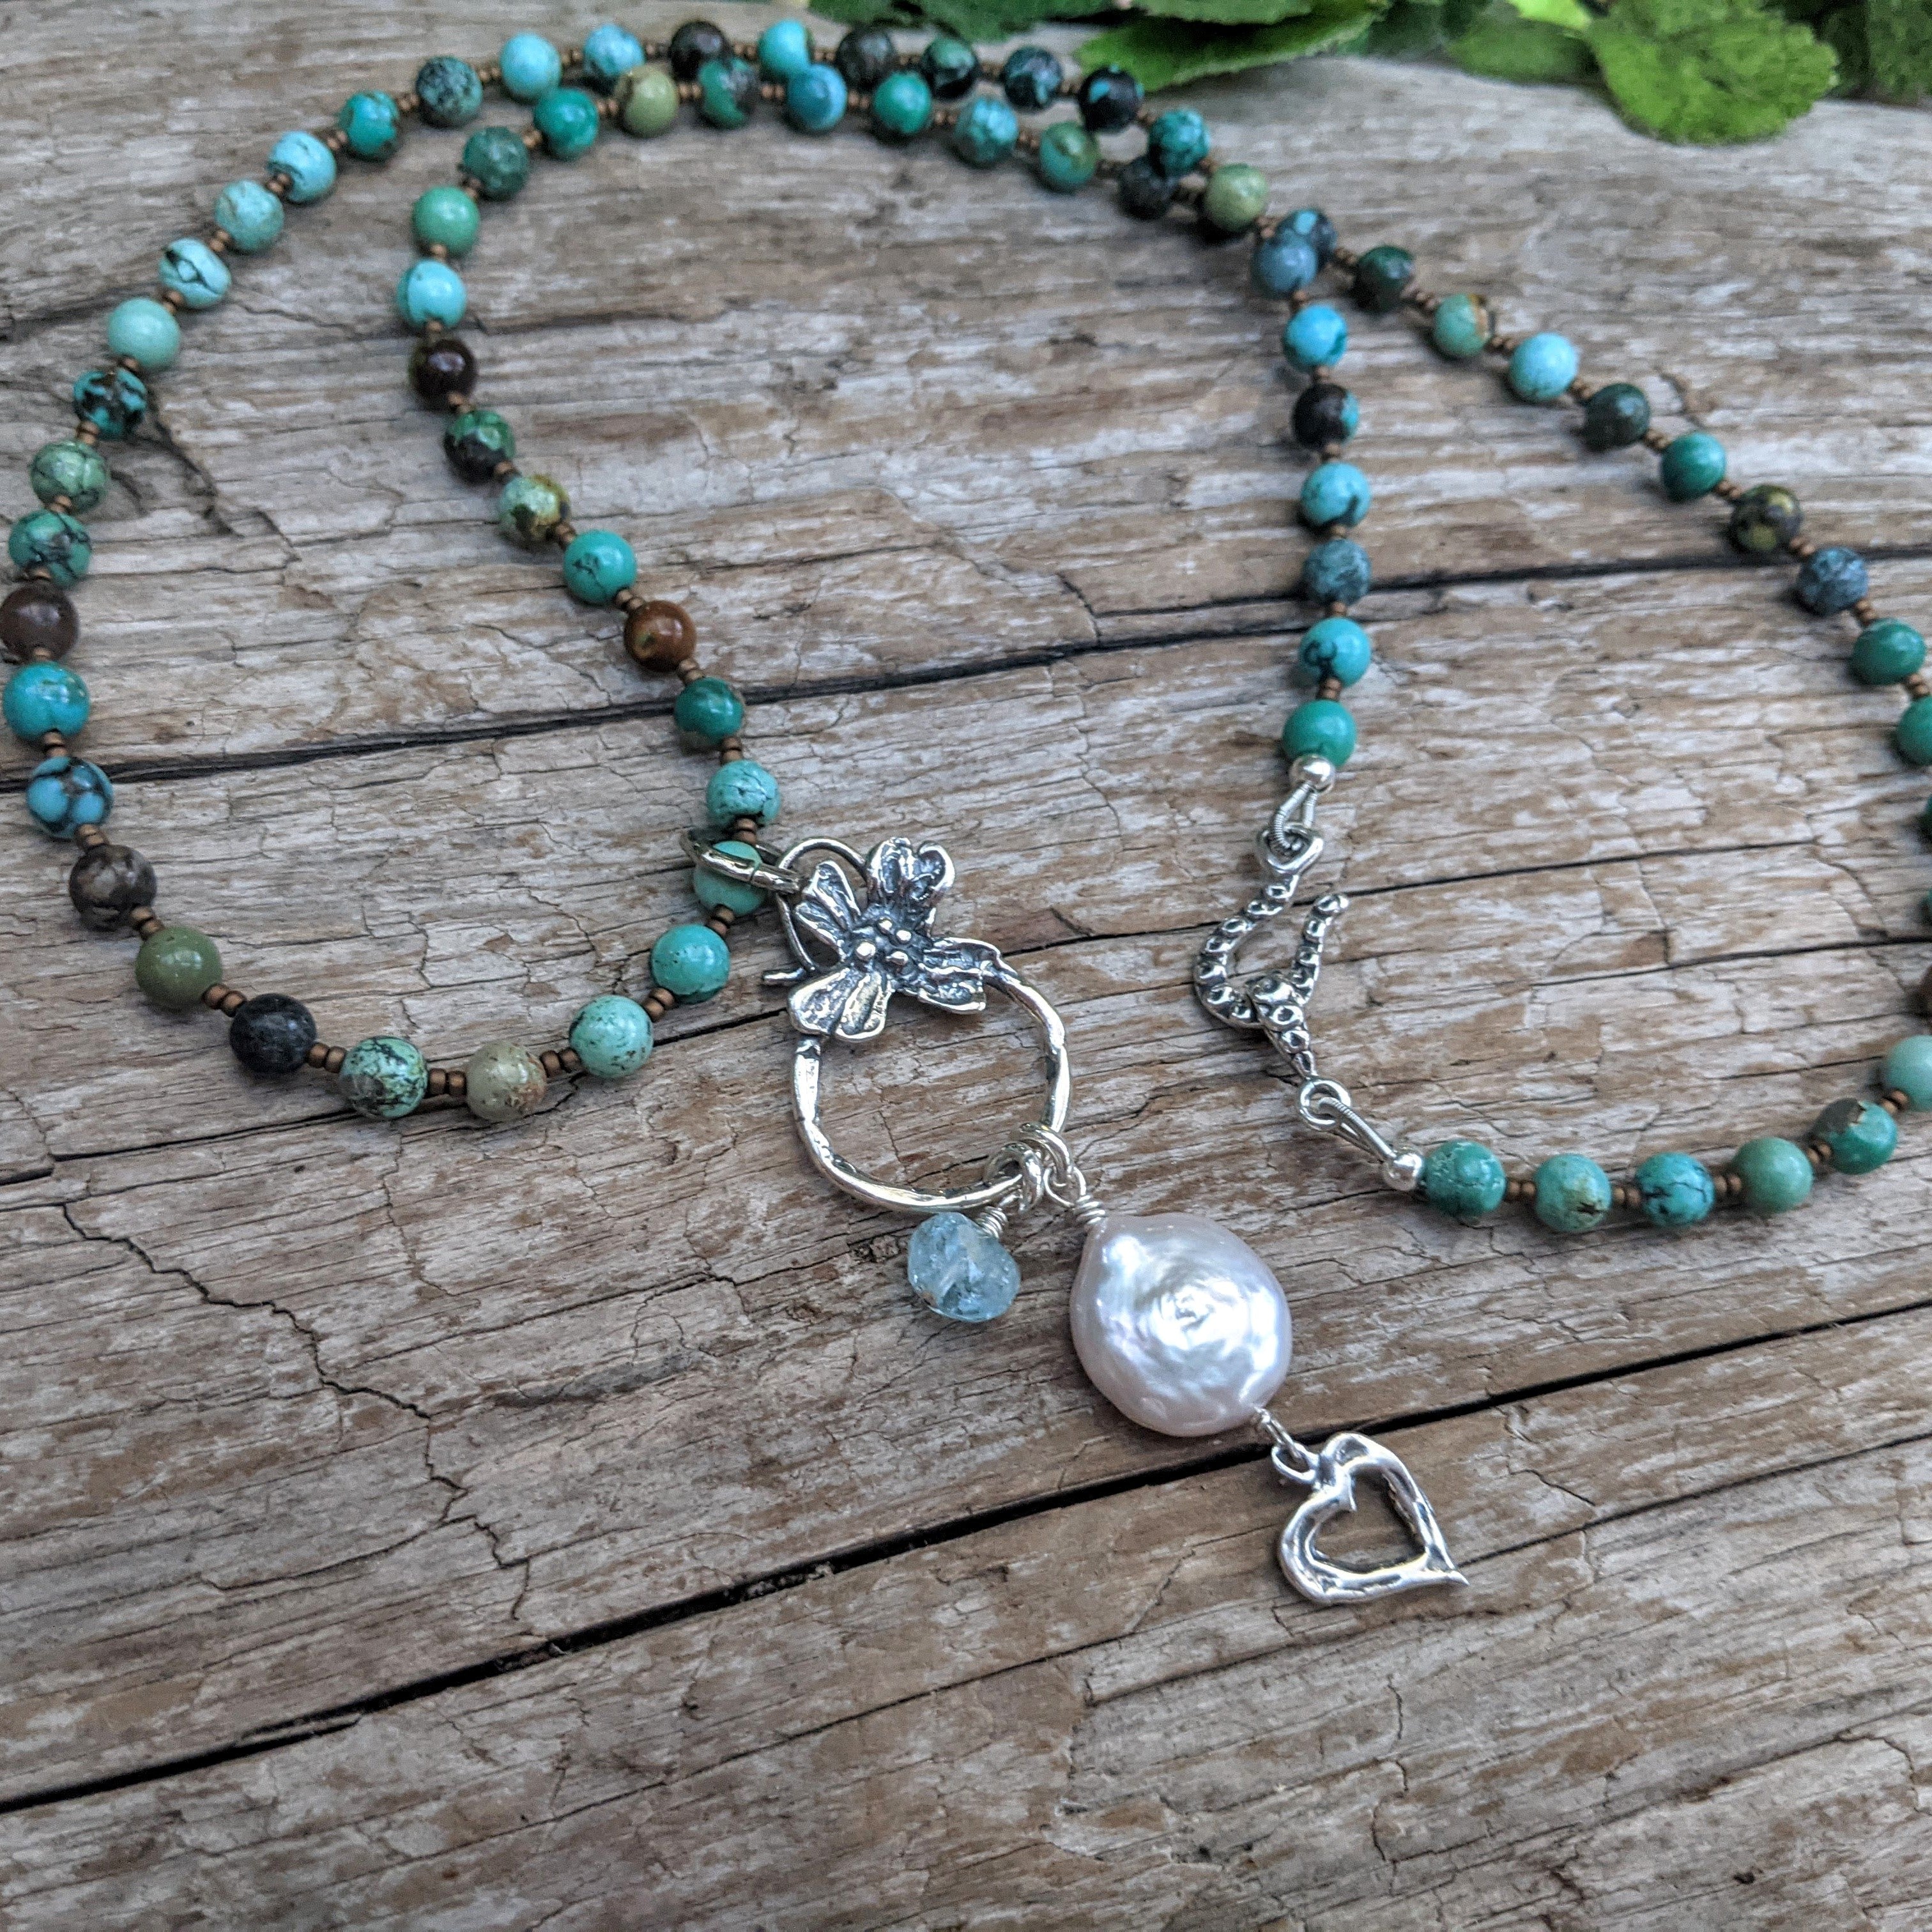 Genuine turquoise necklace with sterling silver flower, big pearl pendant. Rustic turquoise boho necklace handcrafted by Aurora Creative Jewellery.